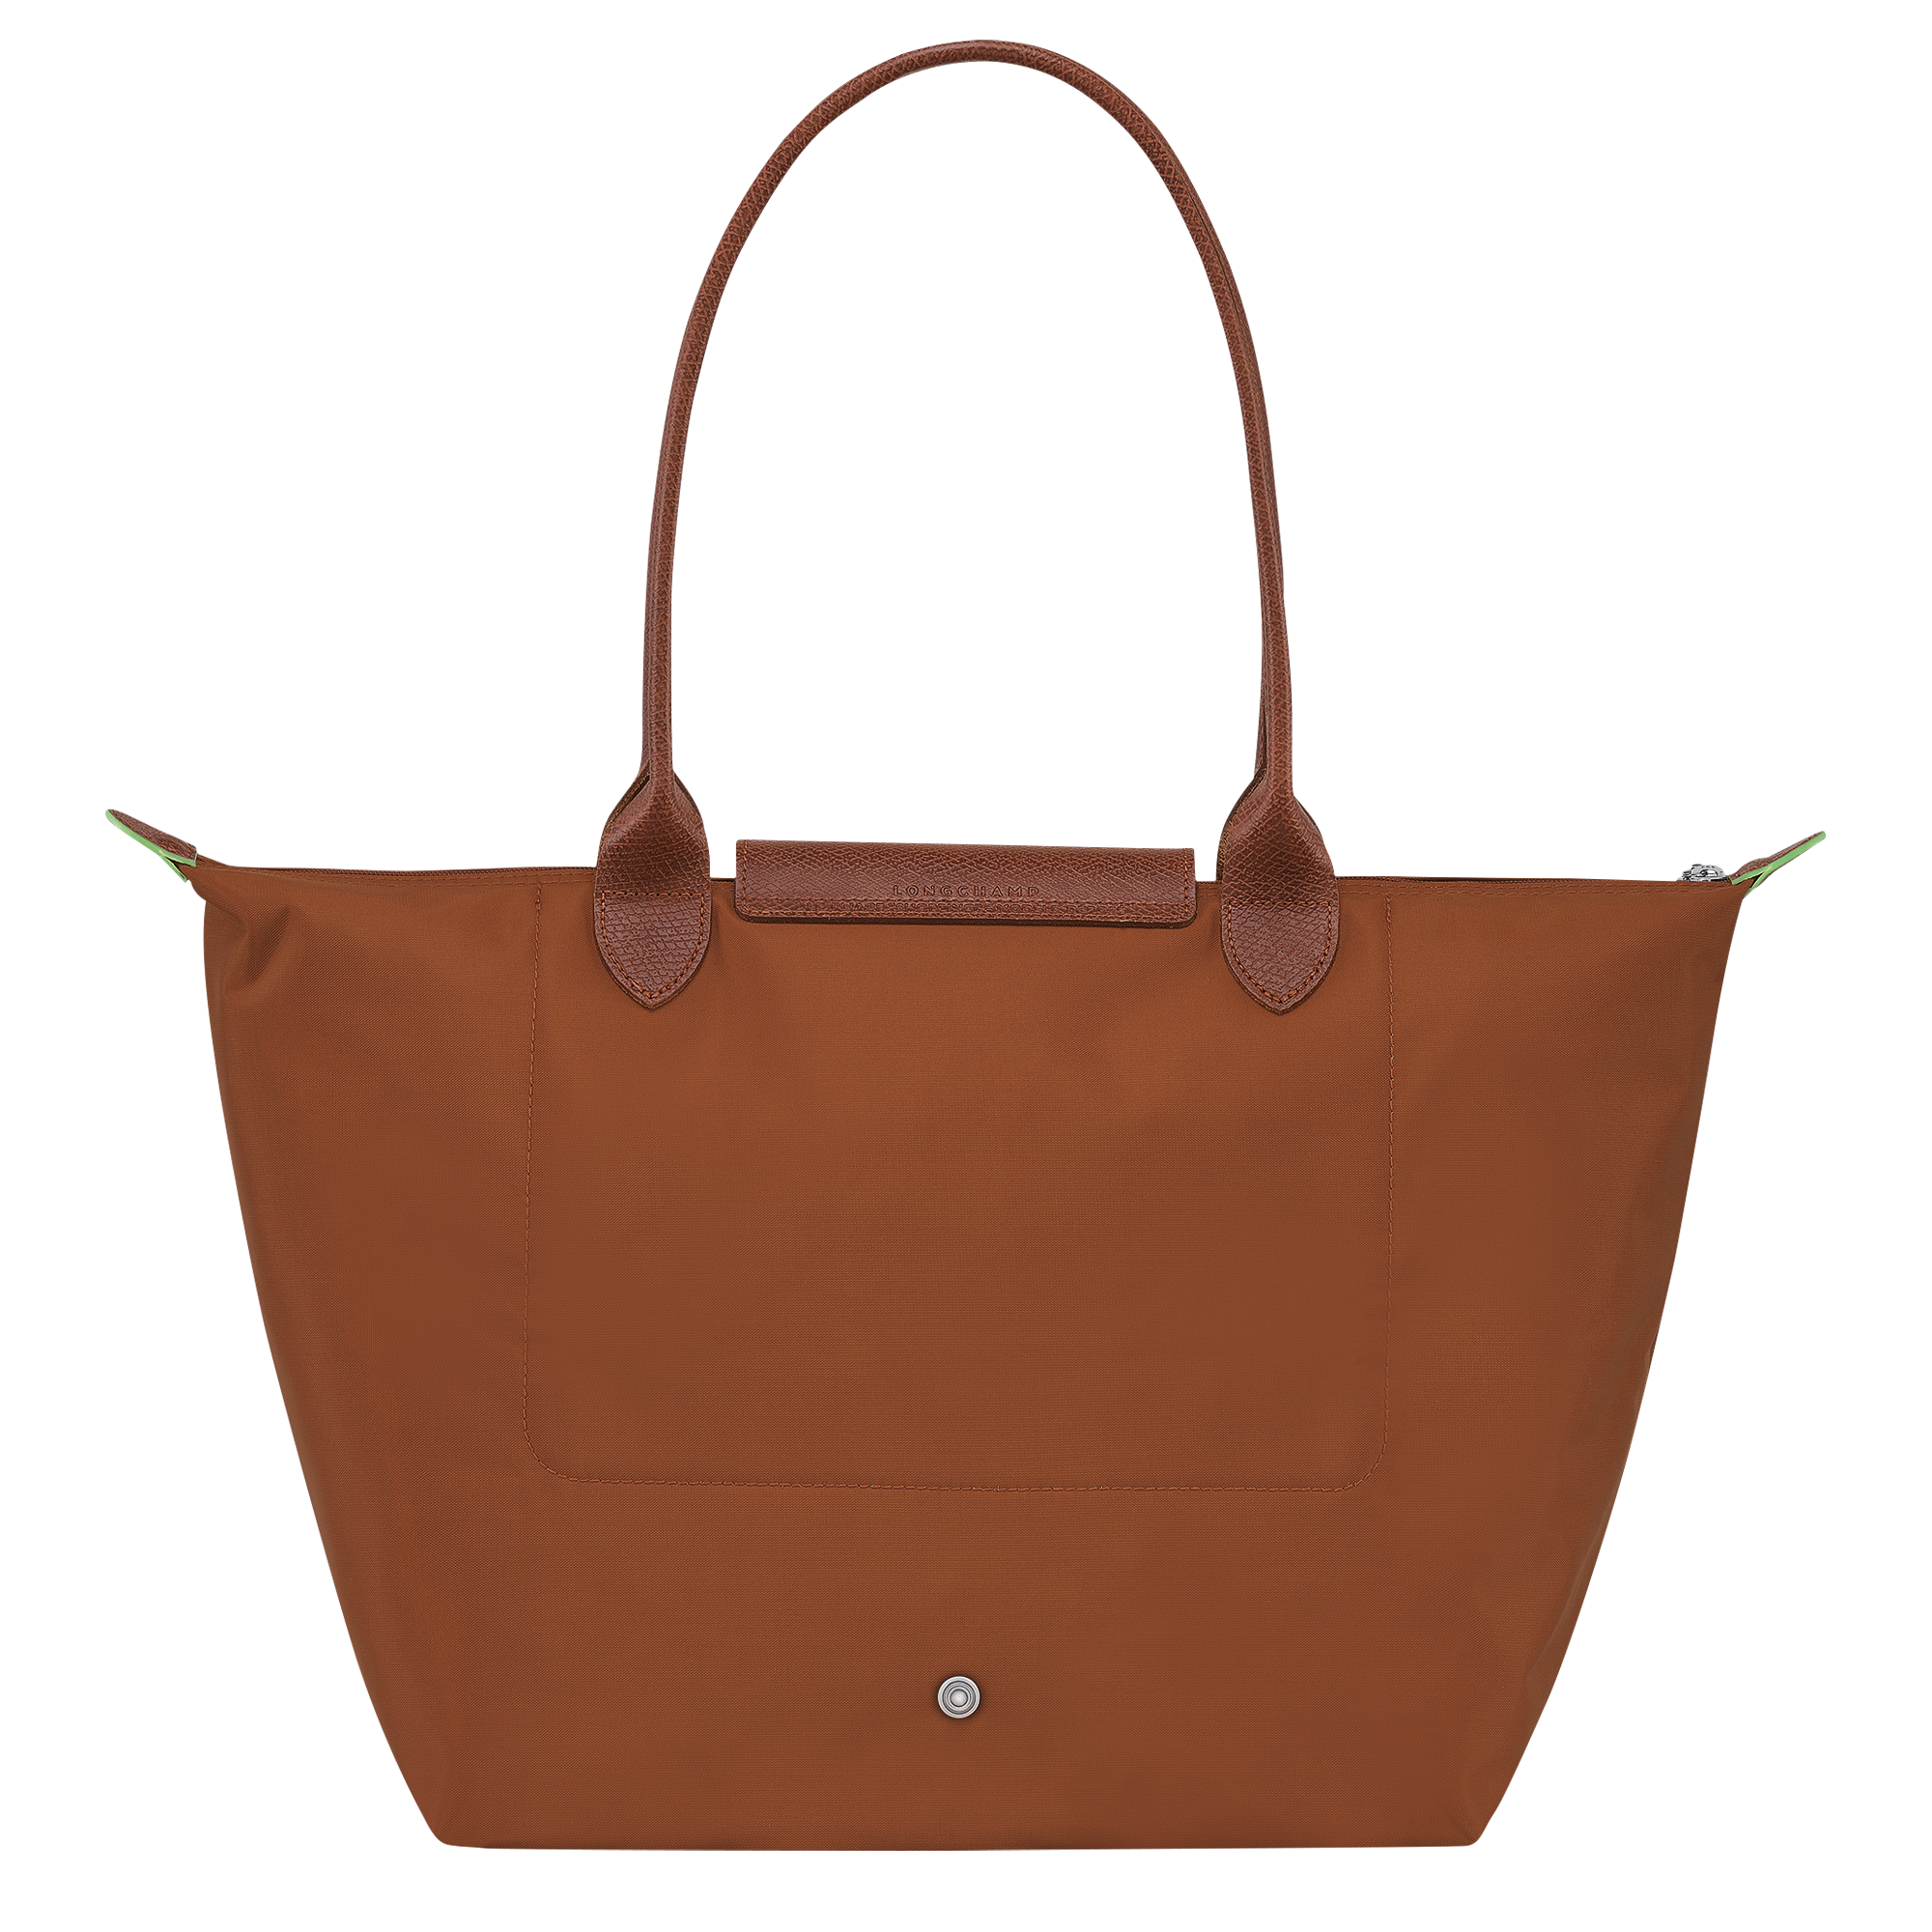 On My Side Bag In Green Leather, 50% OFF